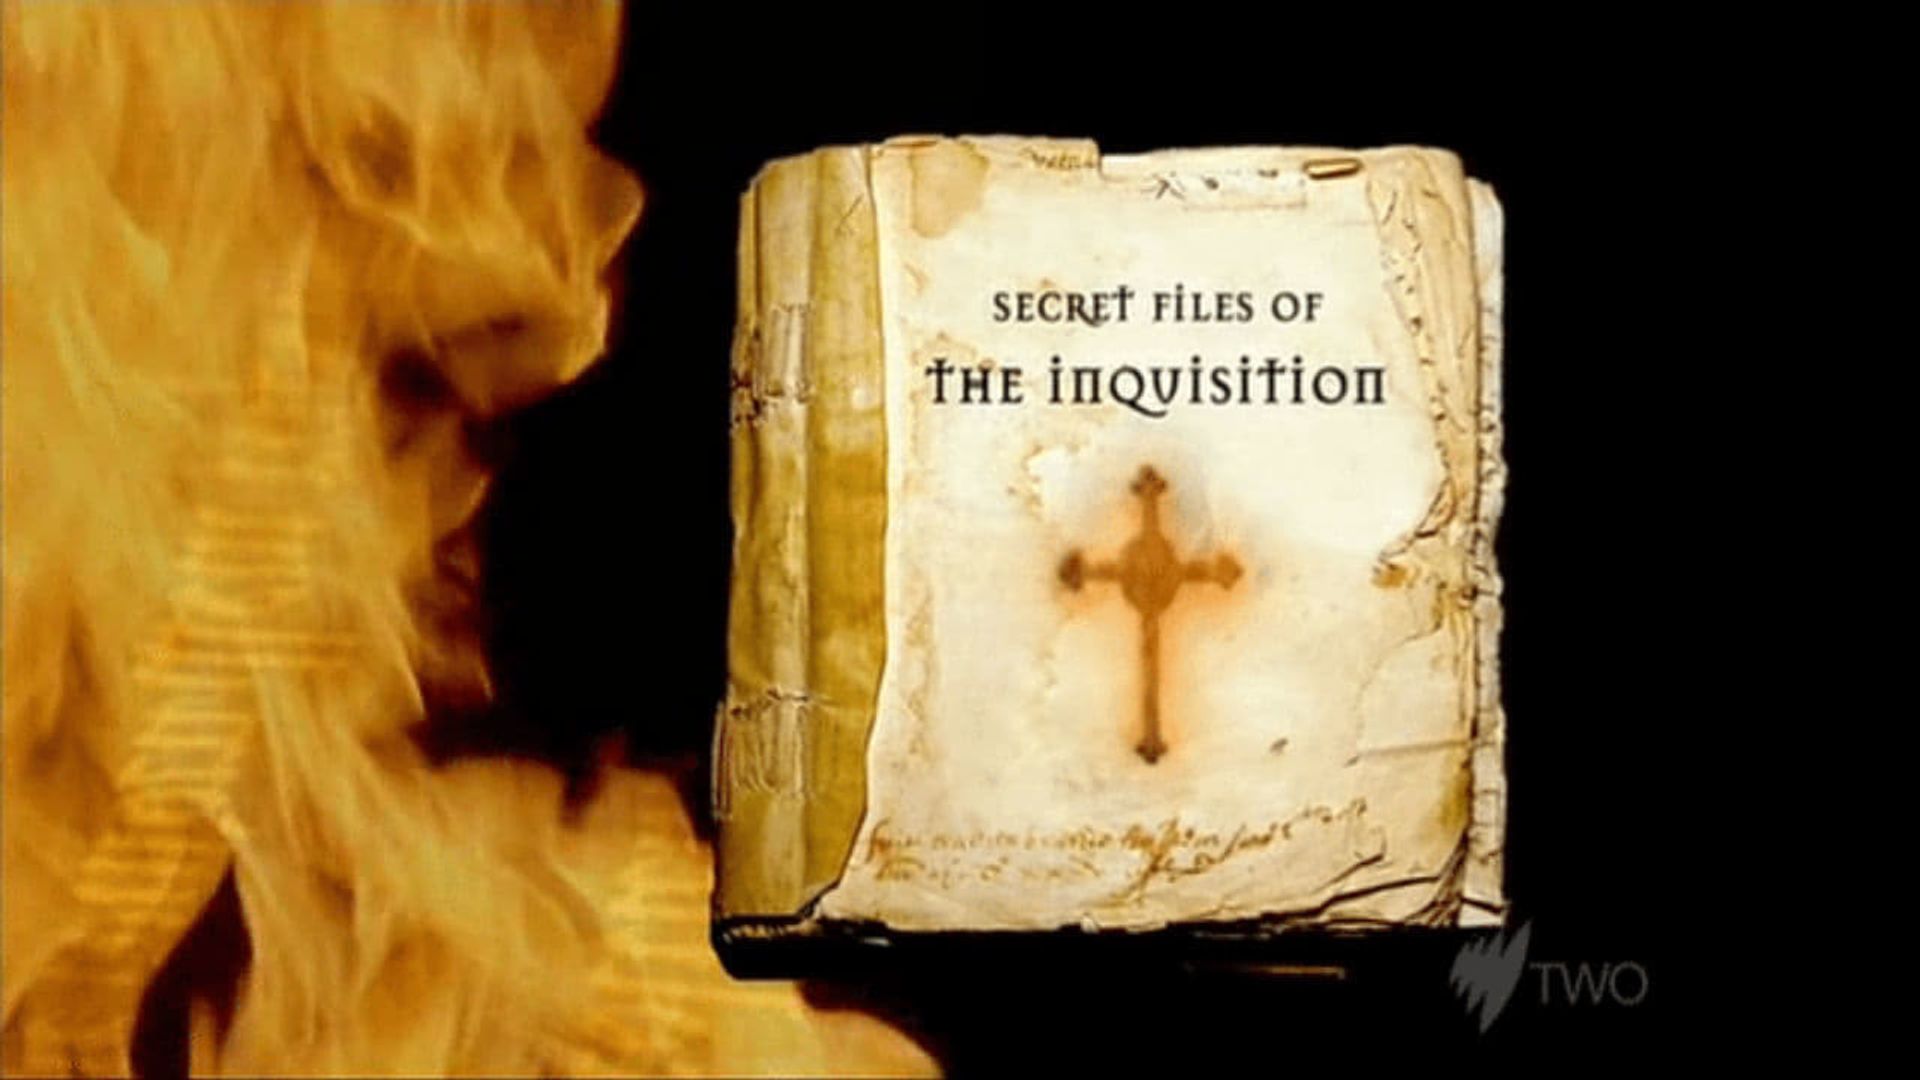 Secret Files of the Inquisition background